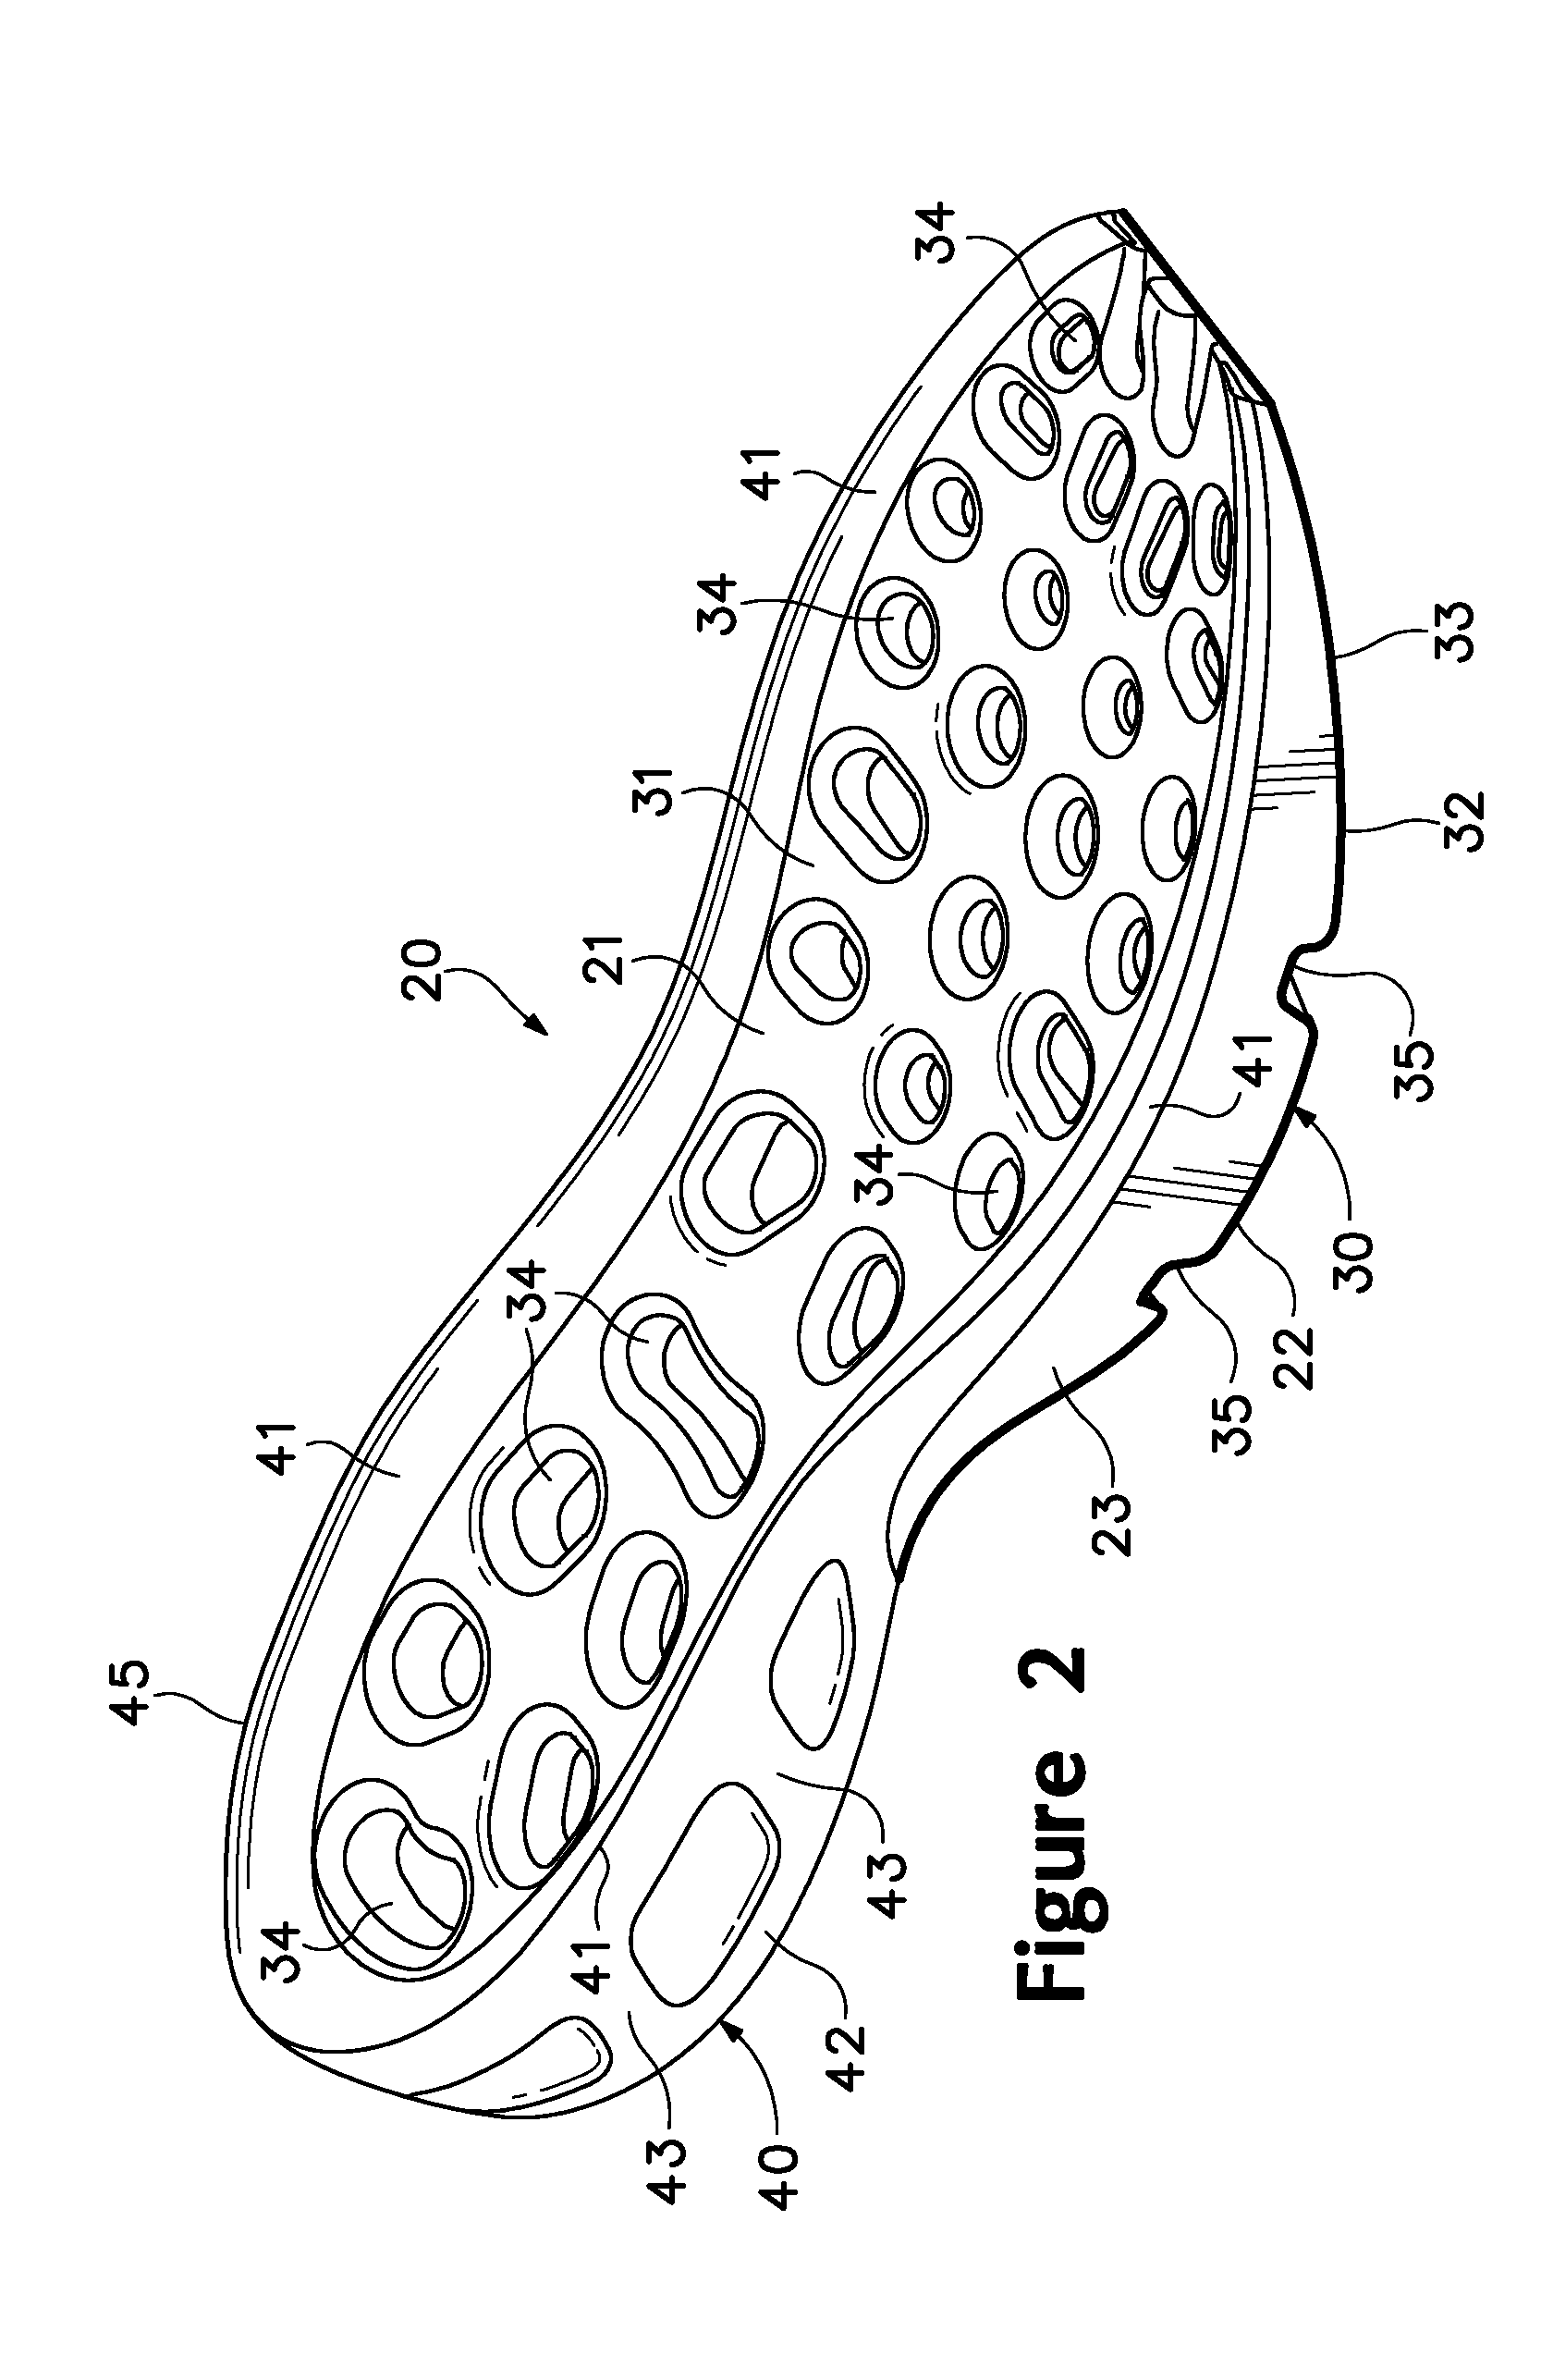 Article Of Footwear Having A Fluid-Filled Bladder With A Reinforcing Structure